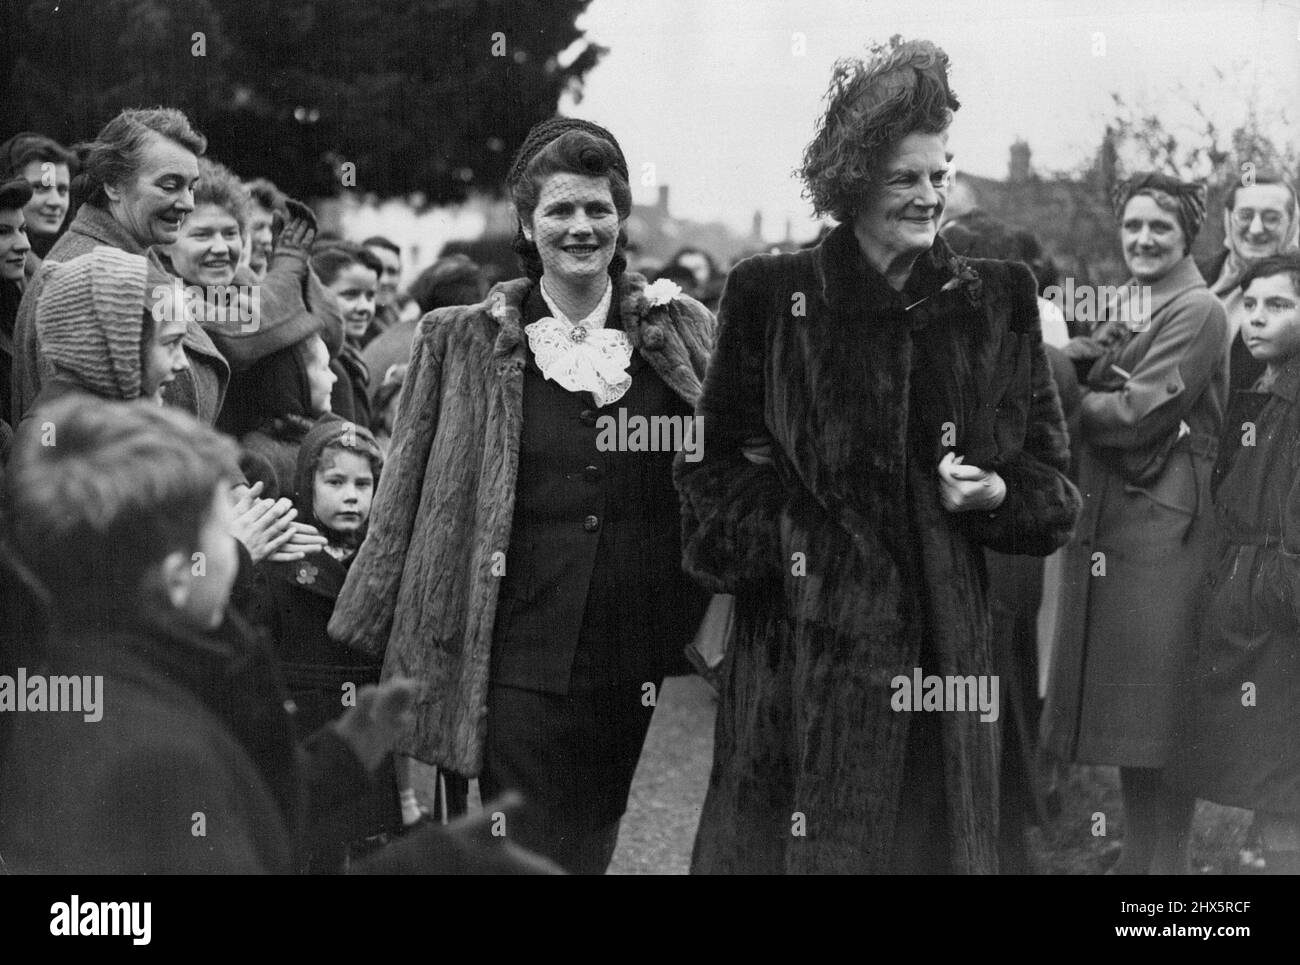 Lord Woolton's Son Weds -- Miss Mary Churchill, whose engagement to Capt. Christopher Soames was announced yesterday, gets a big hand from sight-seers as she arrives with her mother for the wedding at Beaconsfield to-day (Saturday). At the Church of St. Mary and All Saints, Beaconsfield, Bucksm this afternoon (Saturday), the Hon. Roger David Marquis, son and heir of Lord Woolton, was married to the Hon. Lucia Lawson, only daughter of Major General Lord Burnham, of Hall Barn, Beaconsfield. The bridegroom's father is a former Minister of Food and Minister of Reconstruction, and was recently Stock Photo